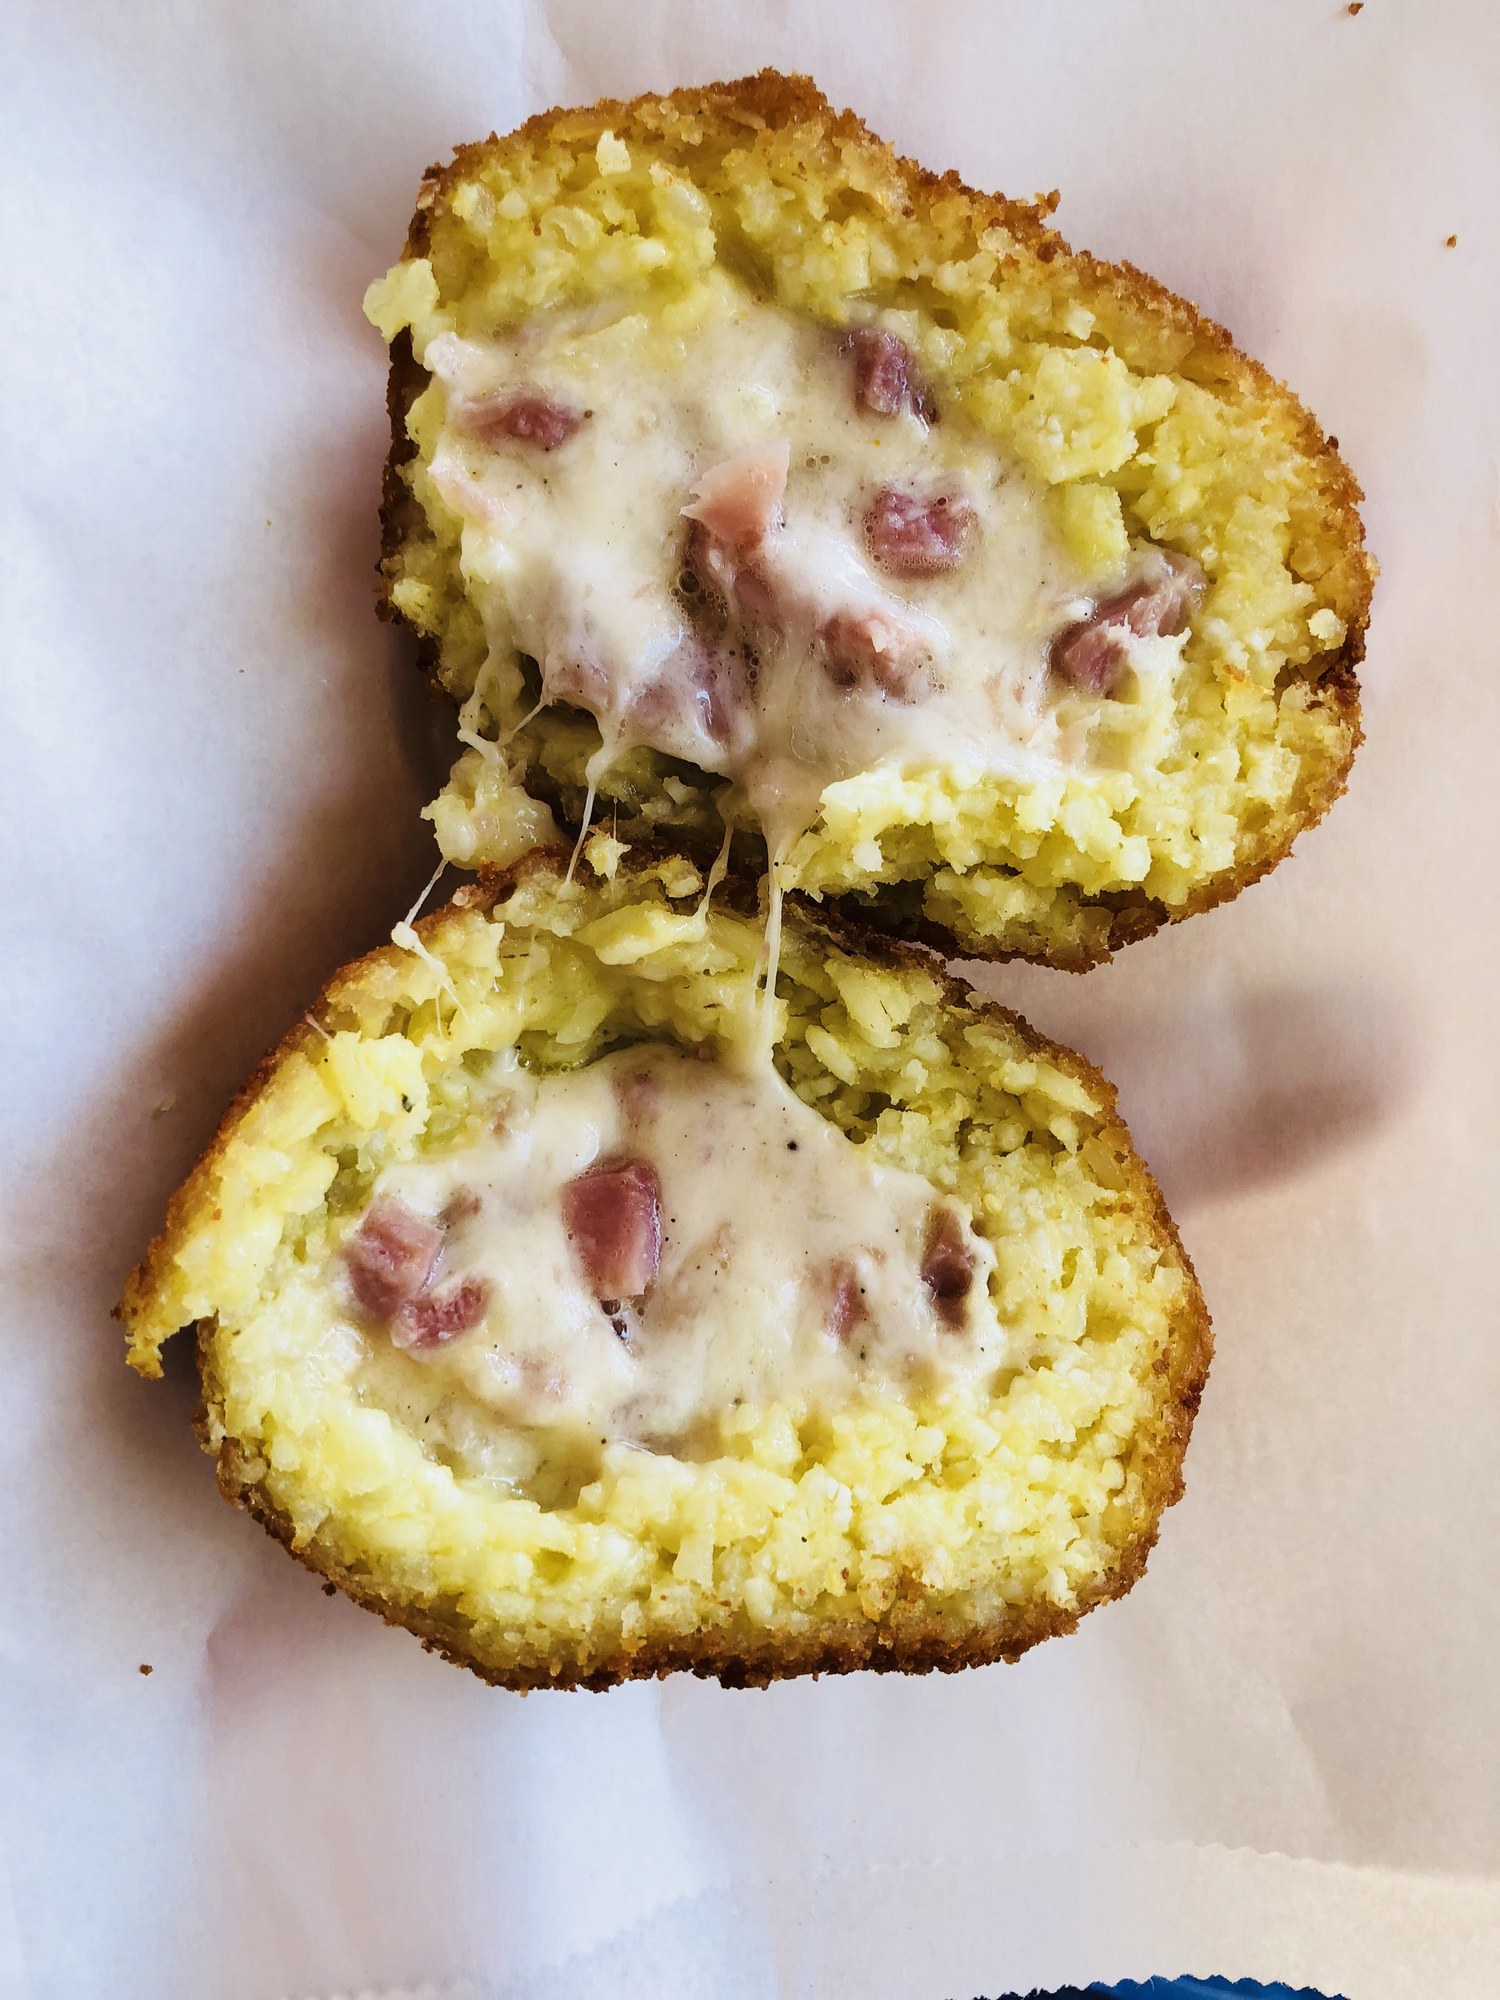 A fried rice ball stuffed with cheese and ham.